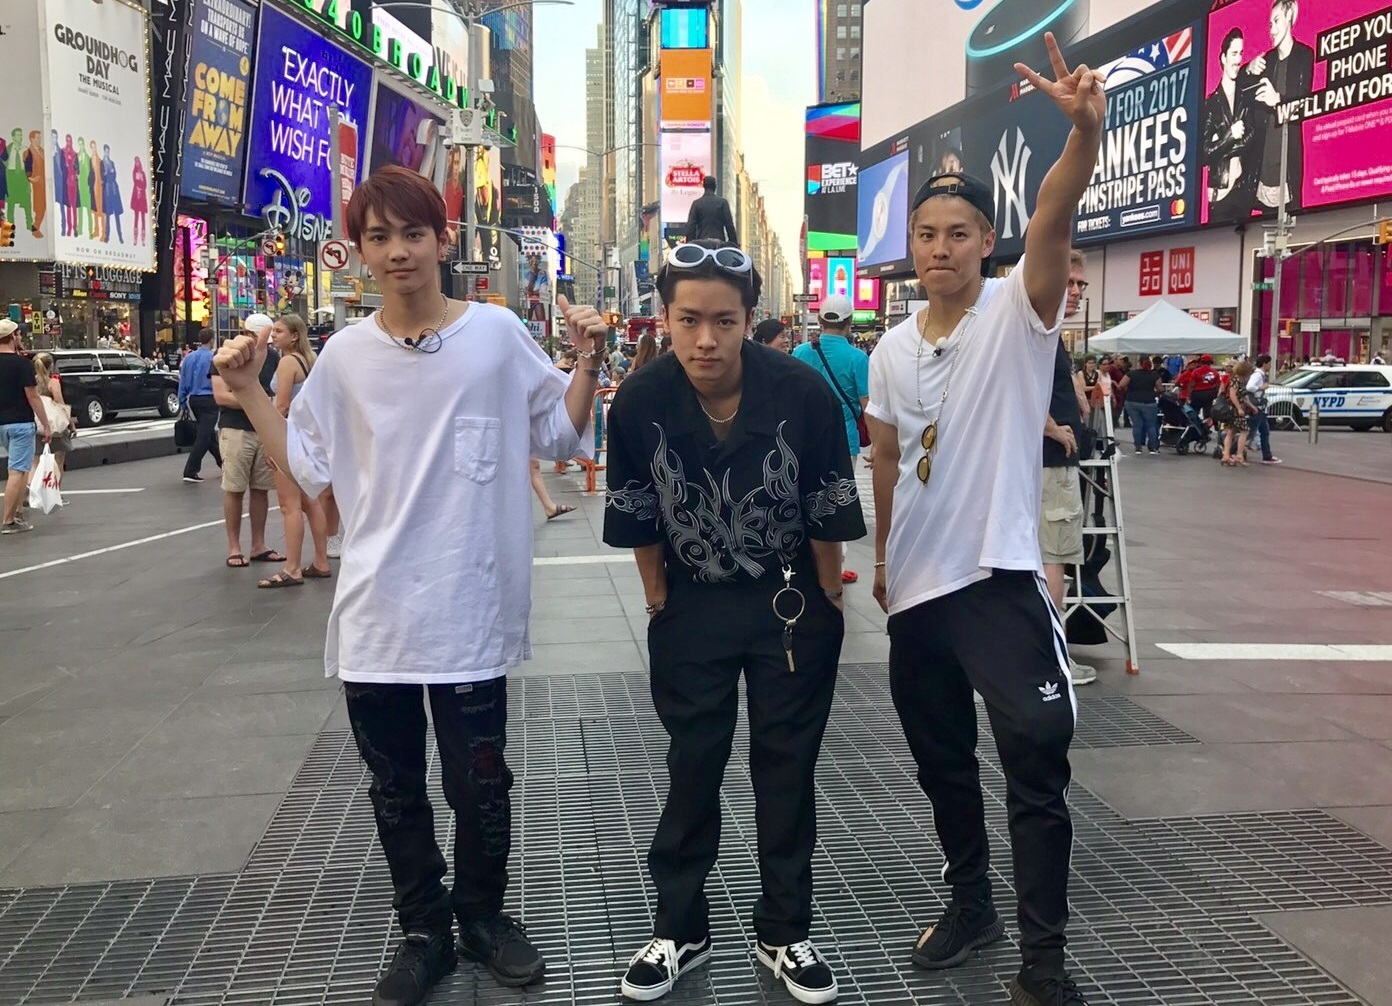 Music On Tv エムオン The Rampage From Exile Tribeボーカルチーム3人の人生初ニューヨークに密着 今 僕たちがニューヨークでやりたいこと 3vocals The Rampage From Exile Tribe 8月に放送決定 Twitterでnyロケの様子を更新中 プレゼント企画も実施